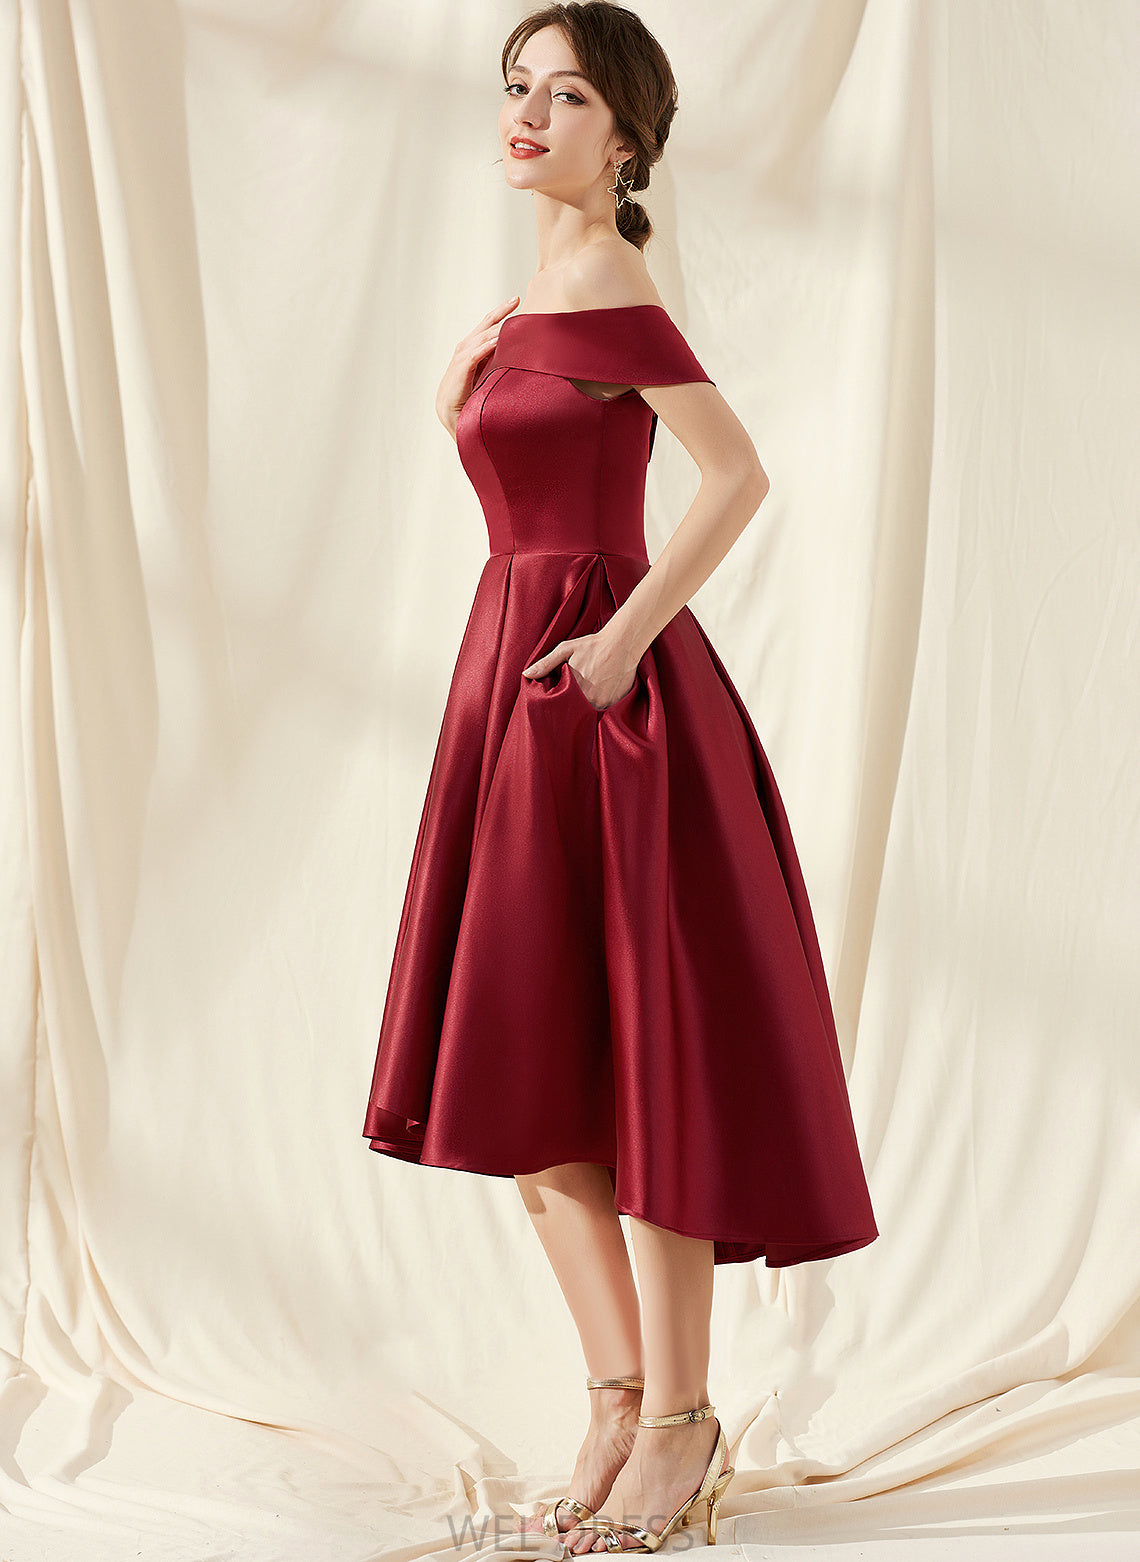 Homecoming Anika Dress Off-the-Shoulder Pockets Asymmetrical Satin A-Line With Homecoming Dresses